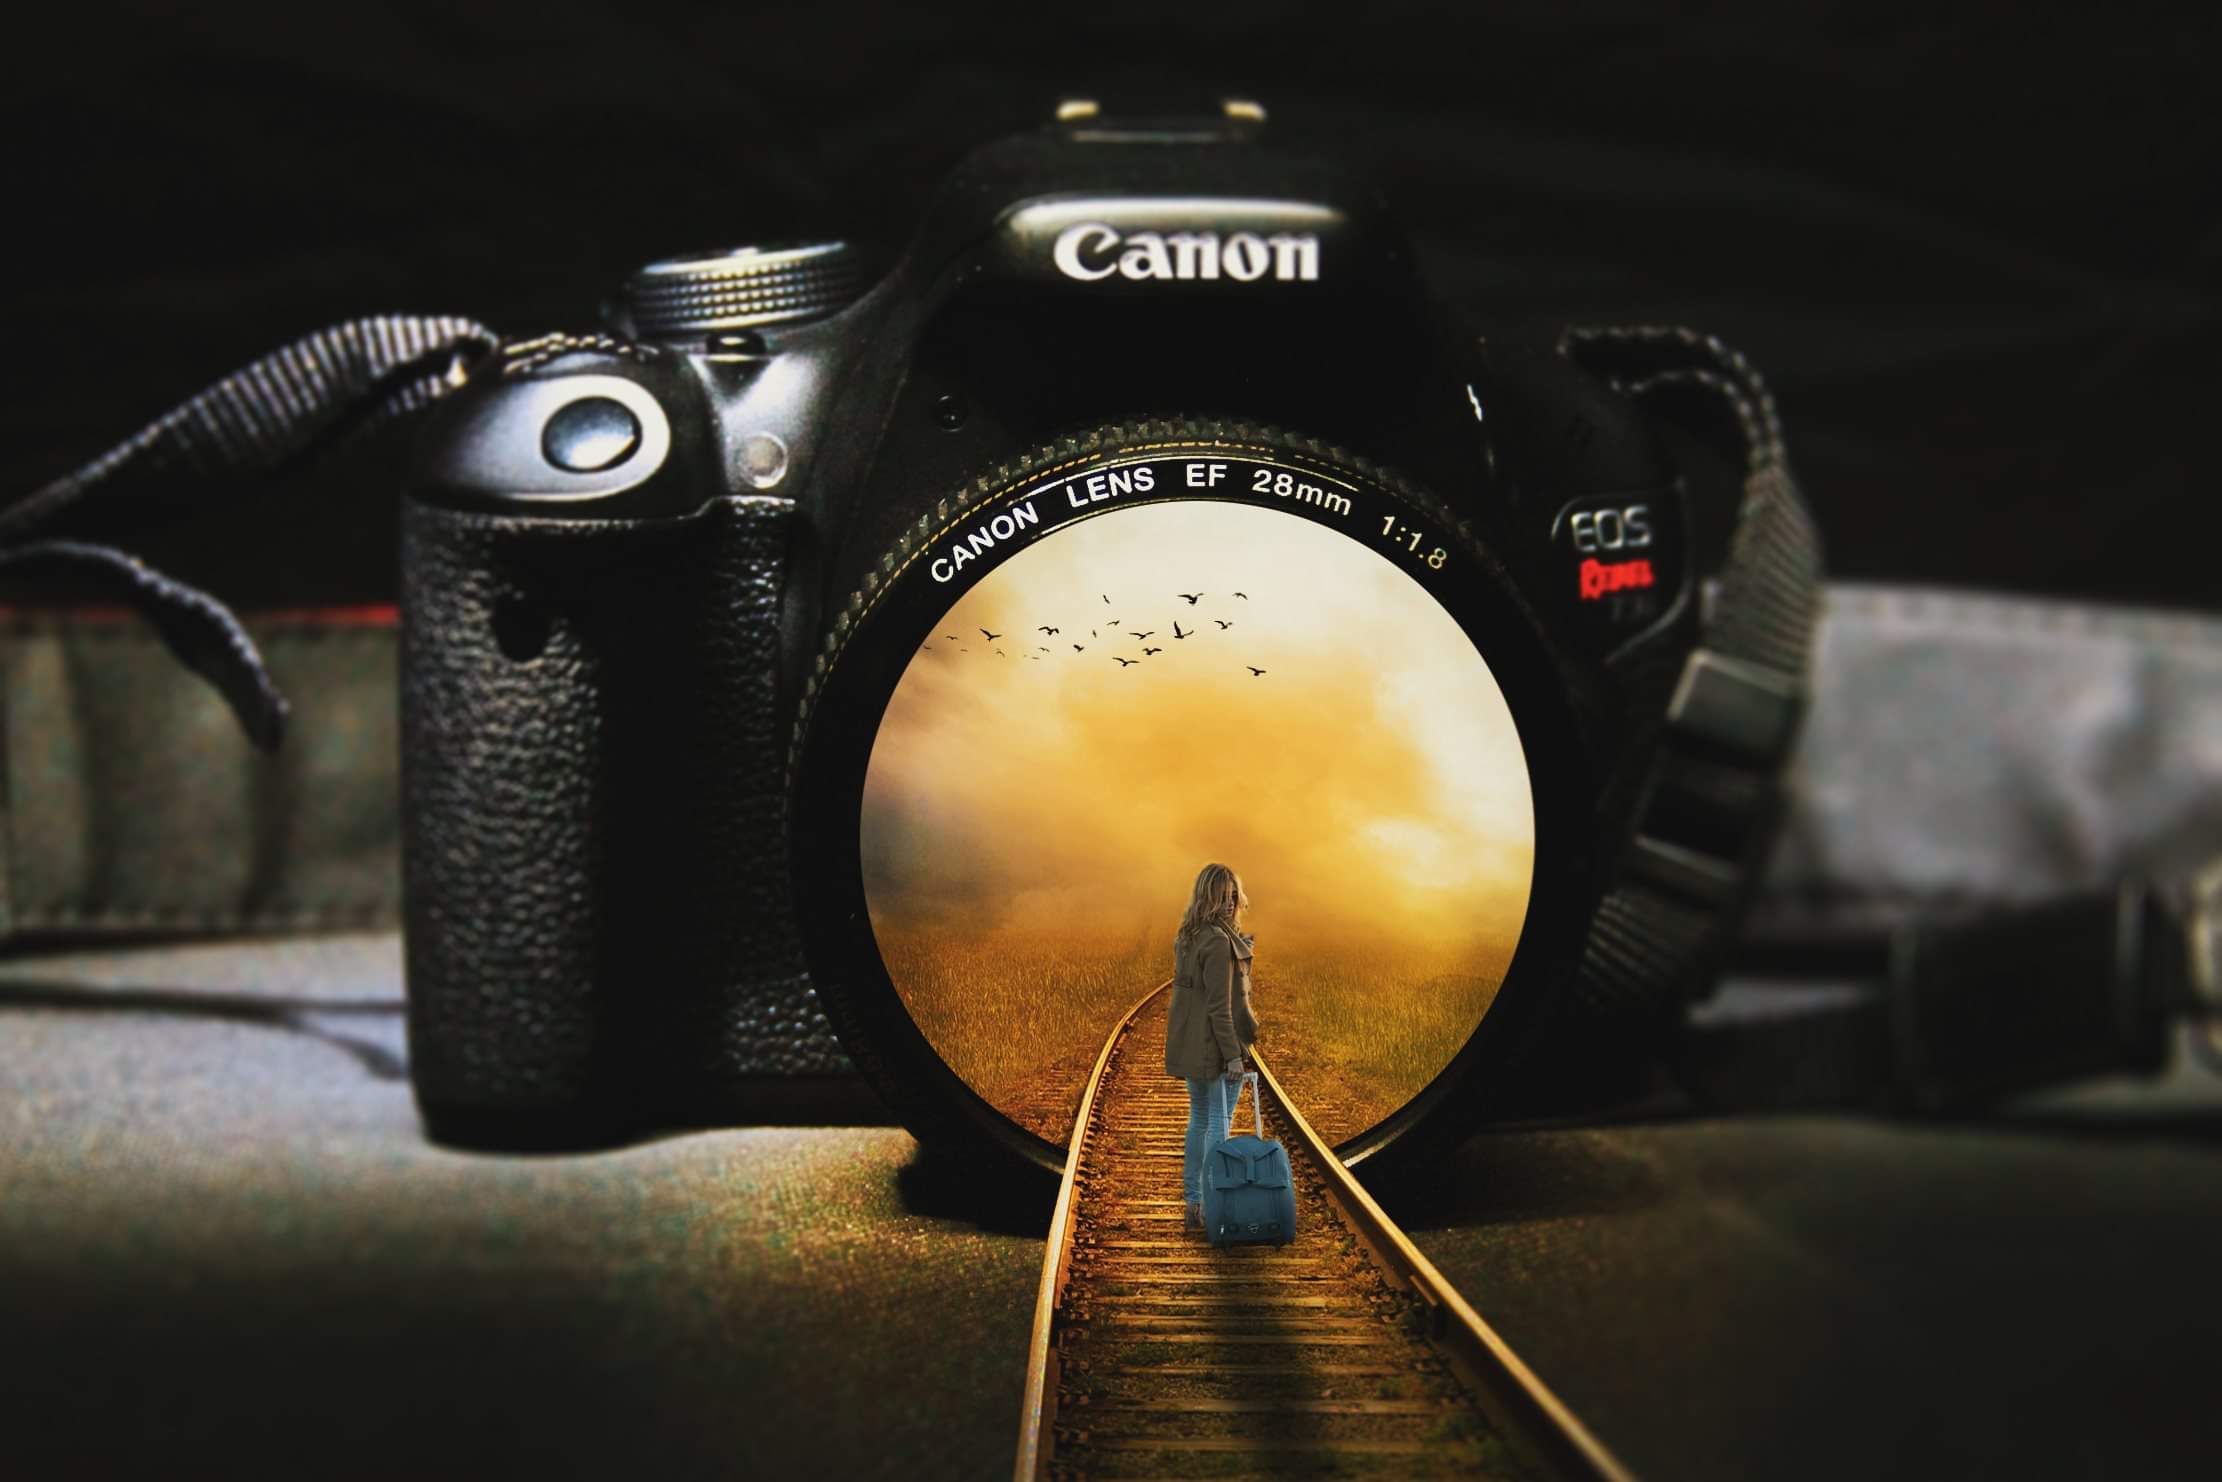 Let's enter the world of photography......